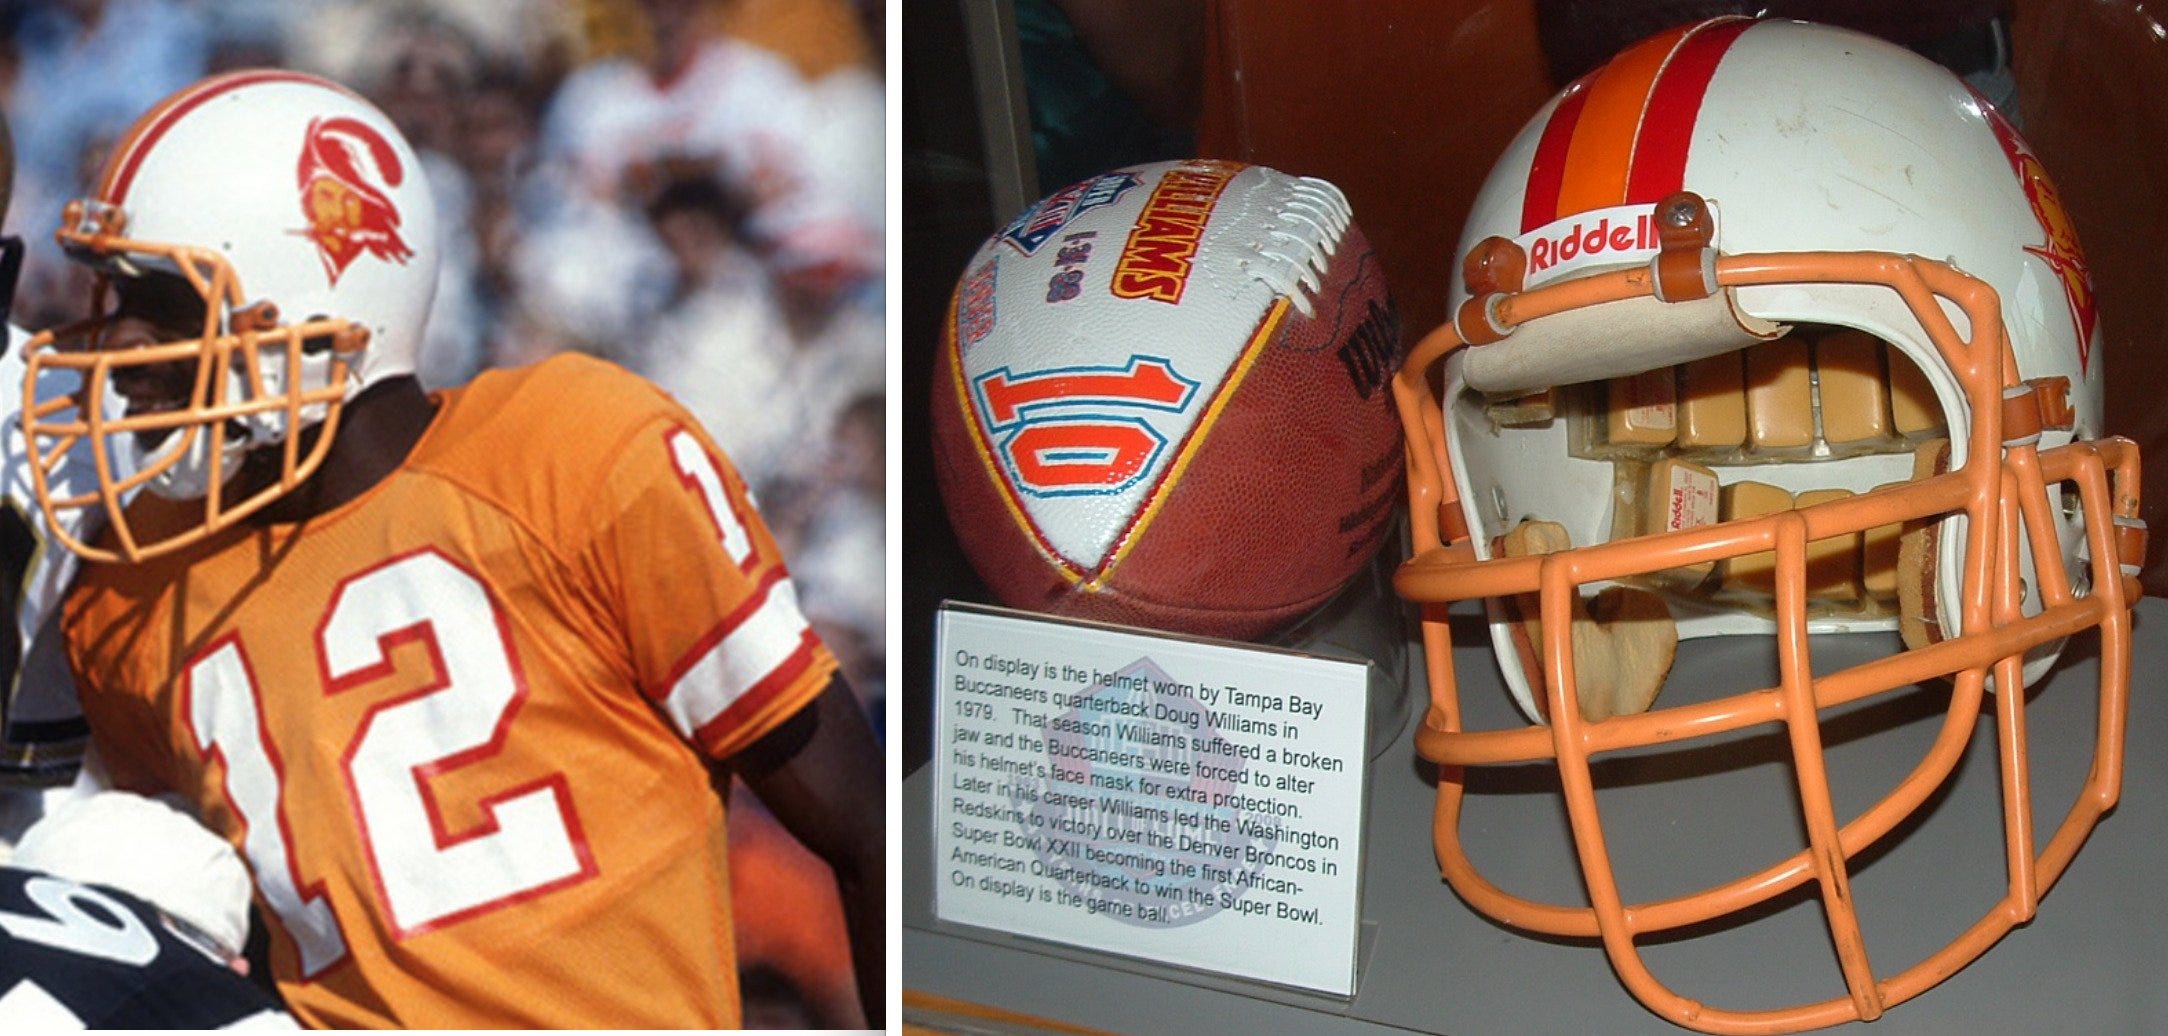 This is why the Buccaneers didn't have creamsicle jerseys with